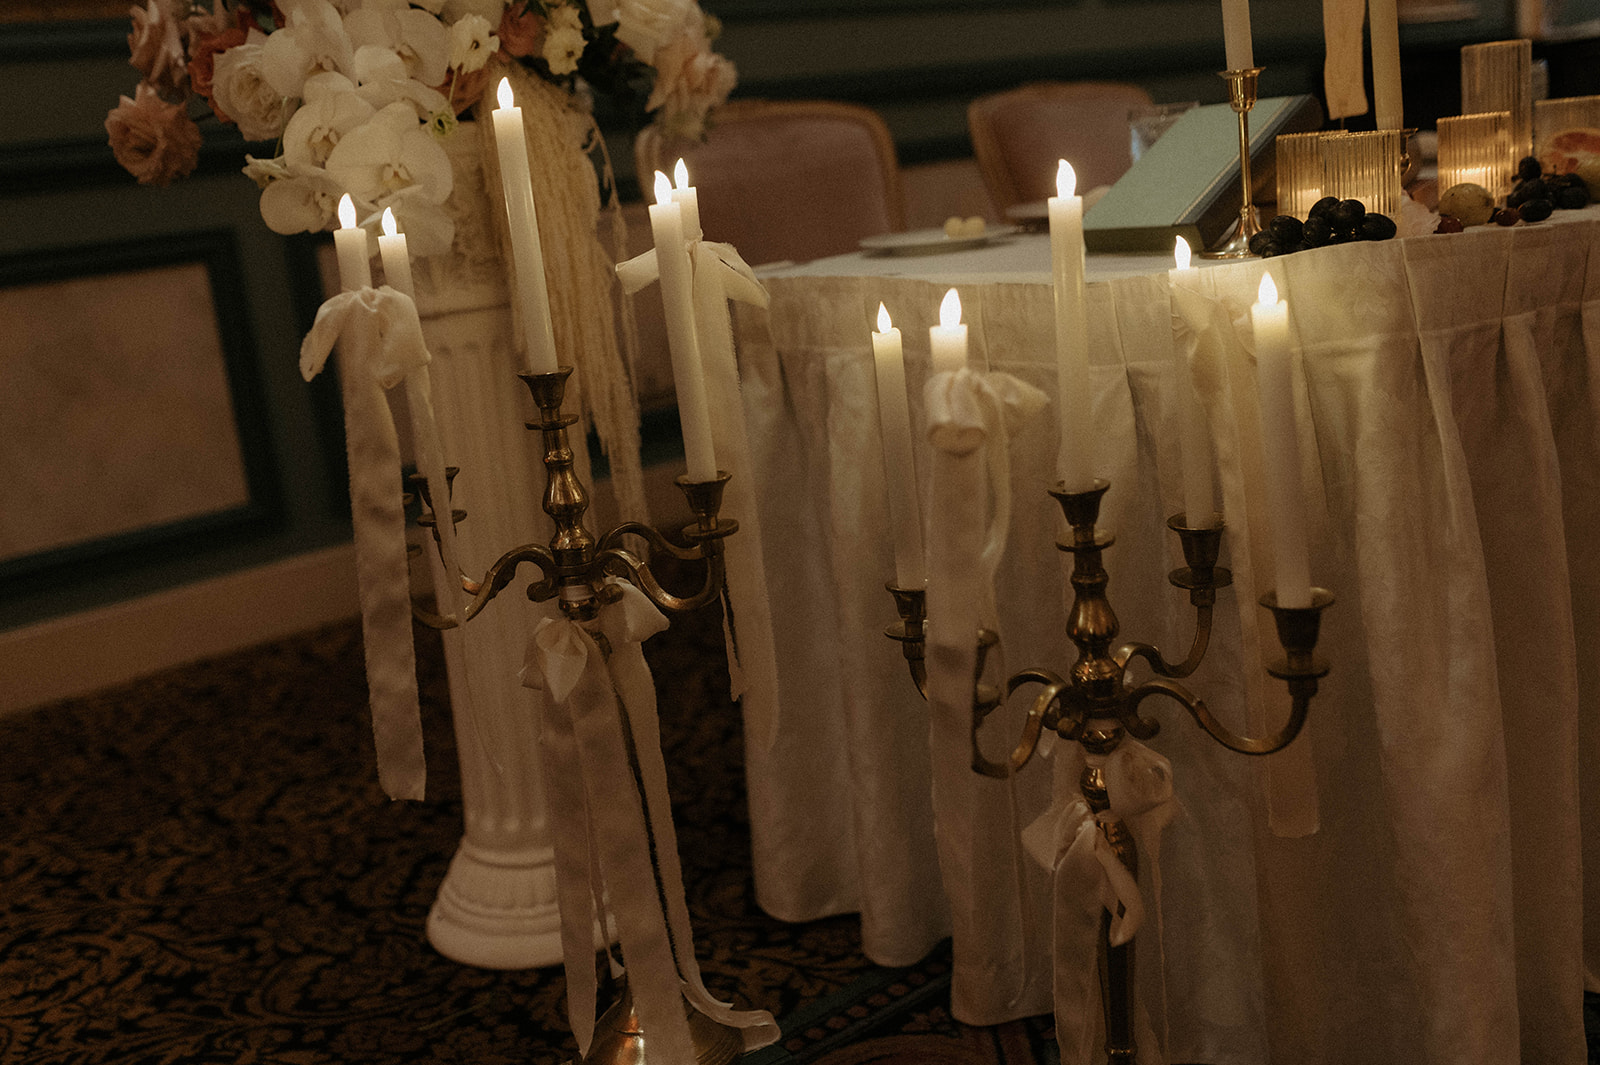 Elegant wedding reception table set for a dinner under a grand chandelier, with ornate wall panels and numerous lit candles for a bridgerton themed wedding